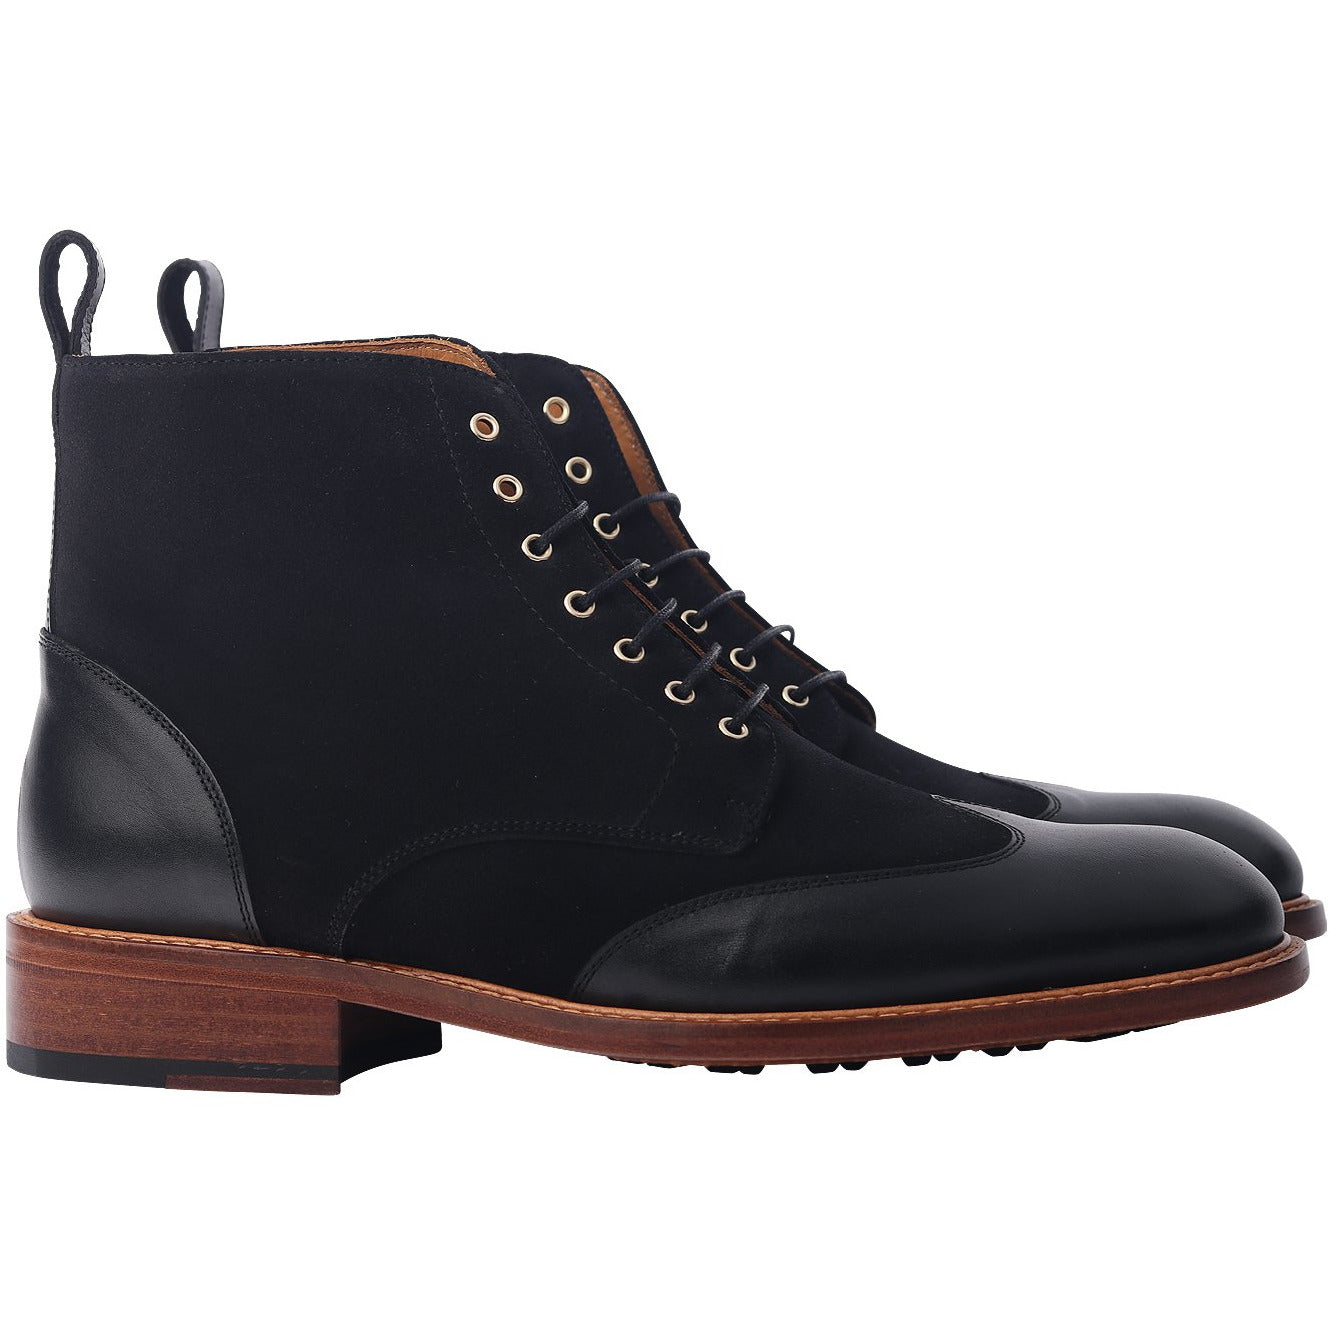 Black Suede Wingtip Chukka Boots - The Winged Valdez Boot Series – Somiar